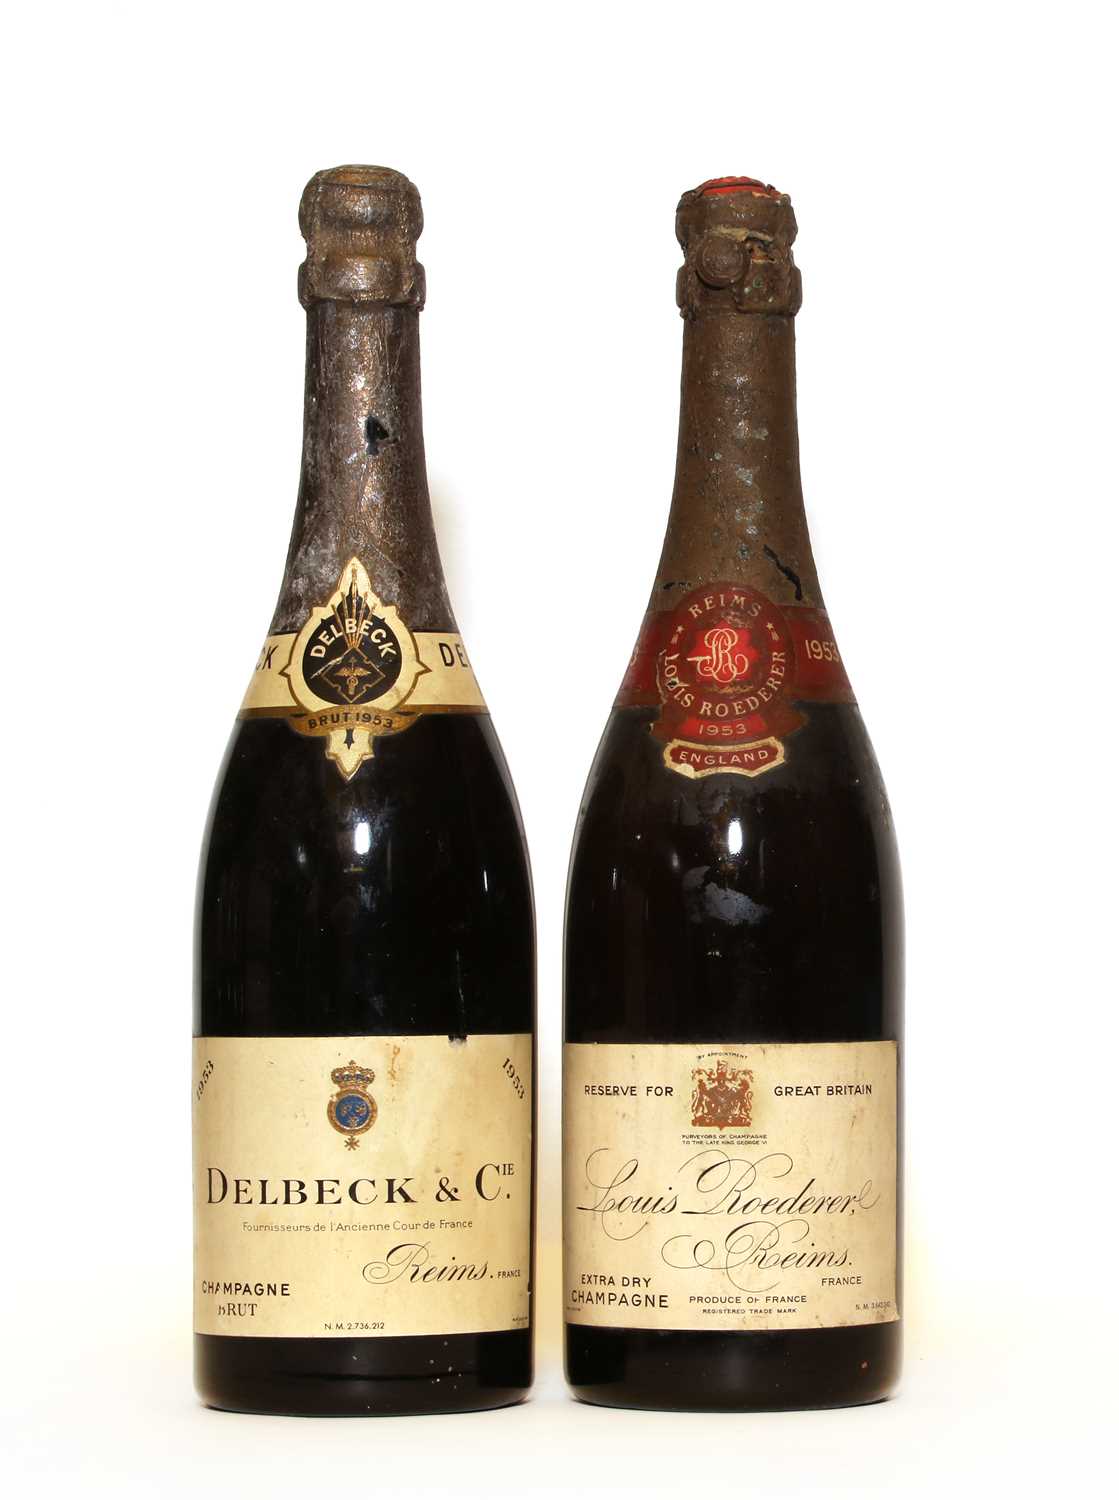 Lot 1 - Louis Roederer, Reims, 1953, one bottle and Delbeck & Cie, 1953, one bottle